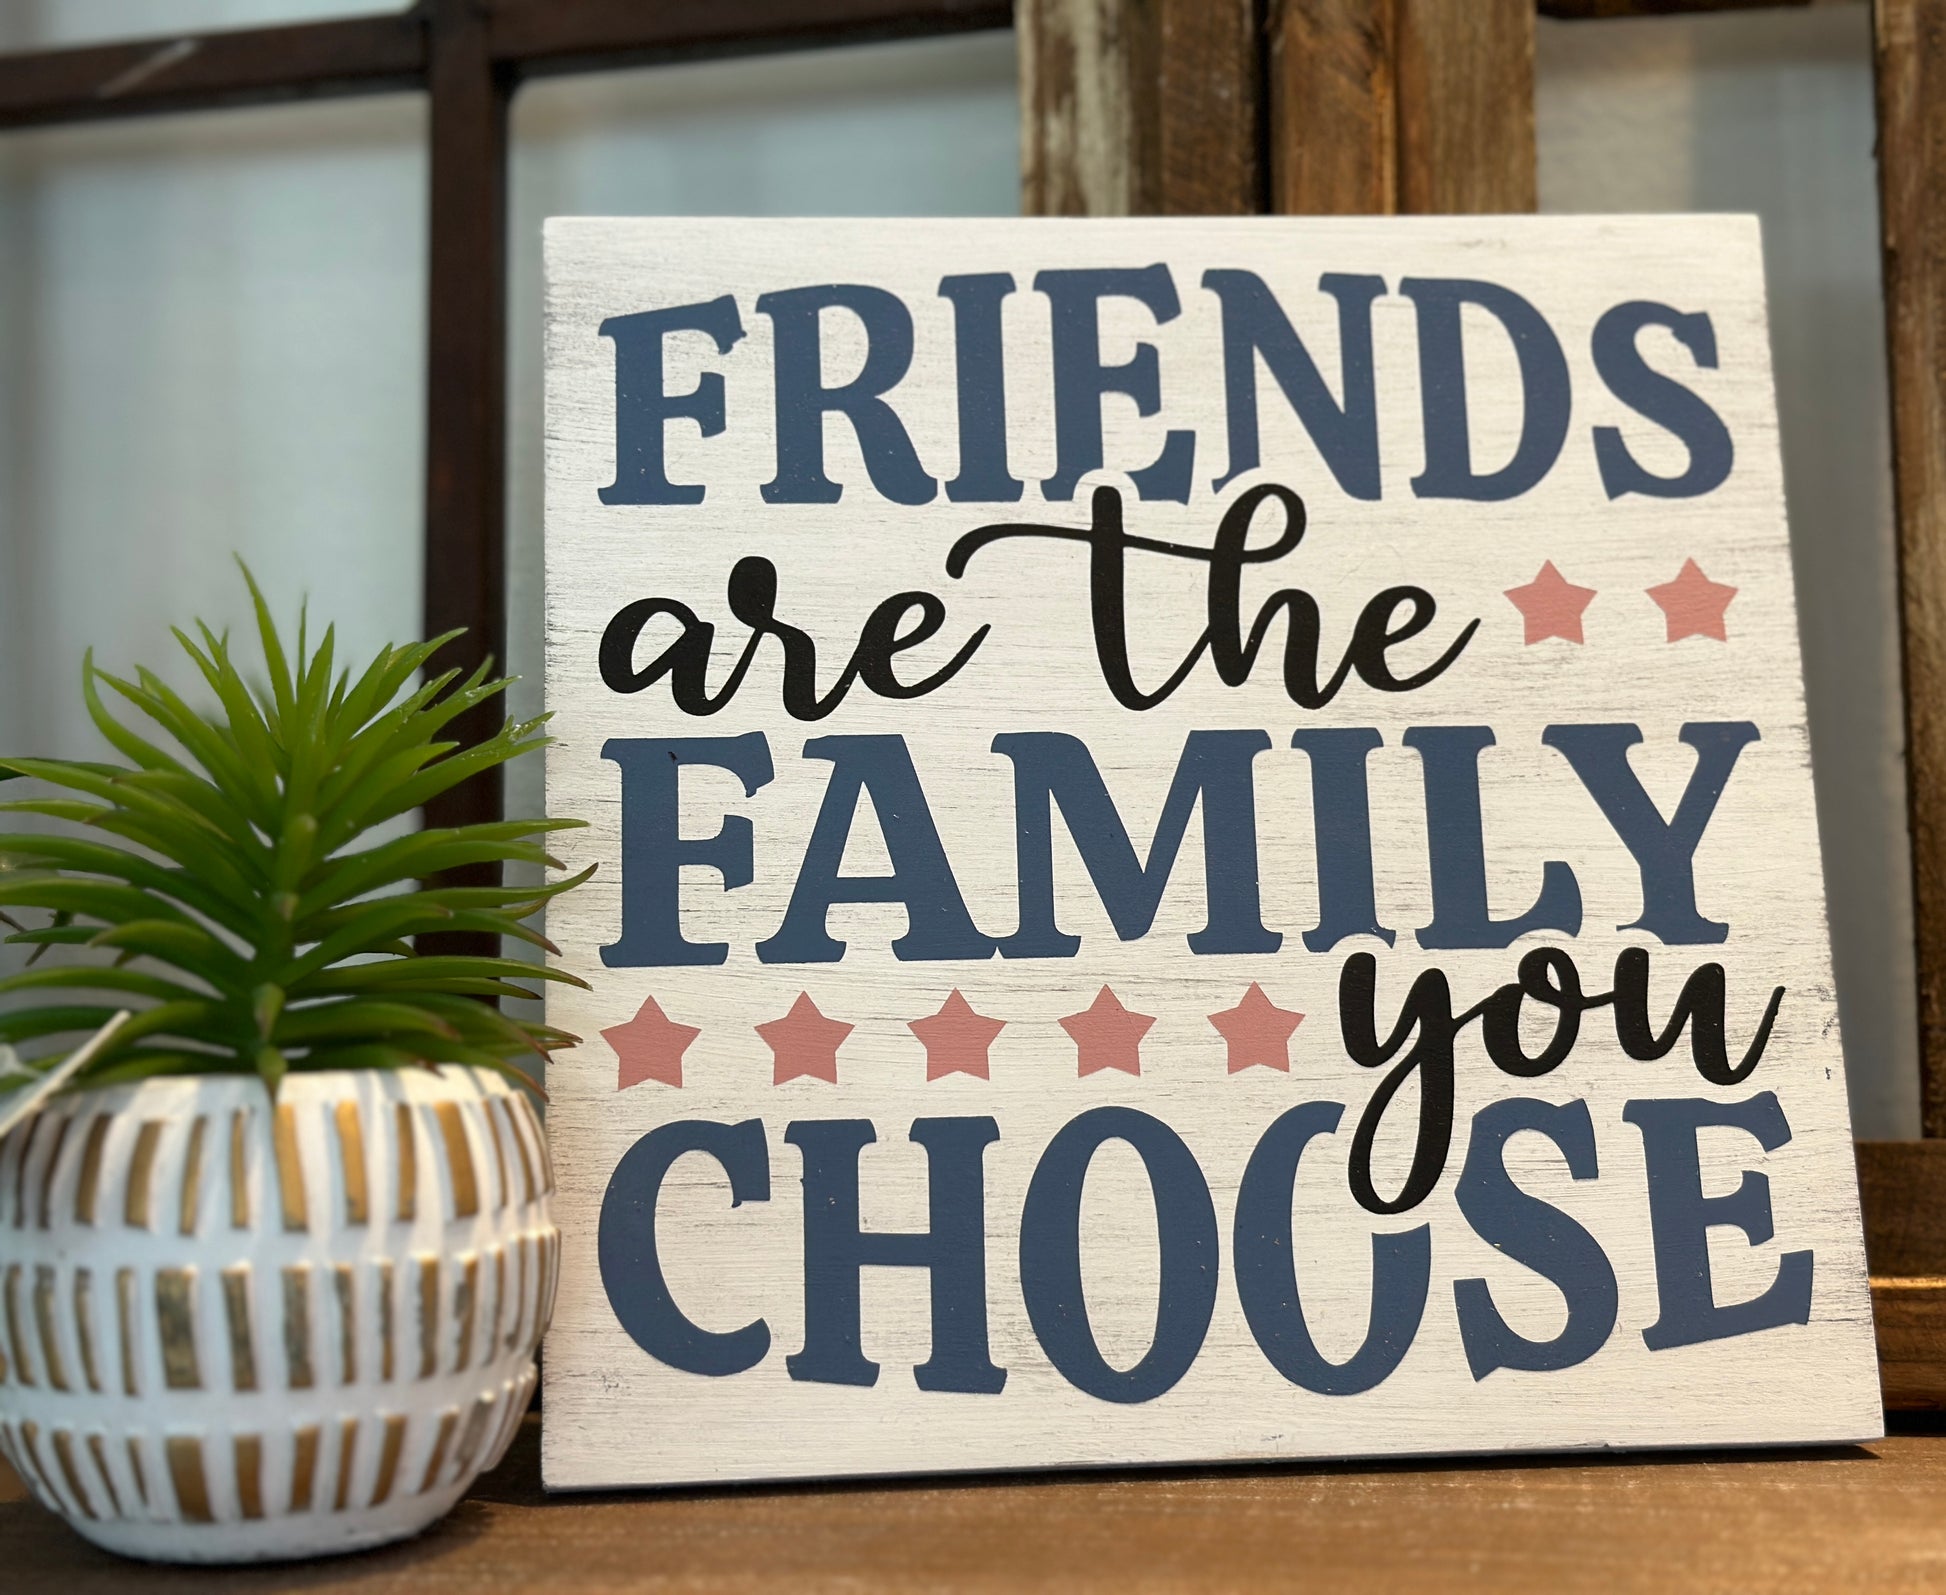 Friends are the Family You Choose: MINI DESIGN - Paisley Grace Makery